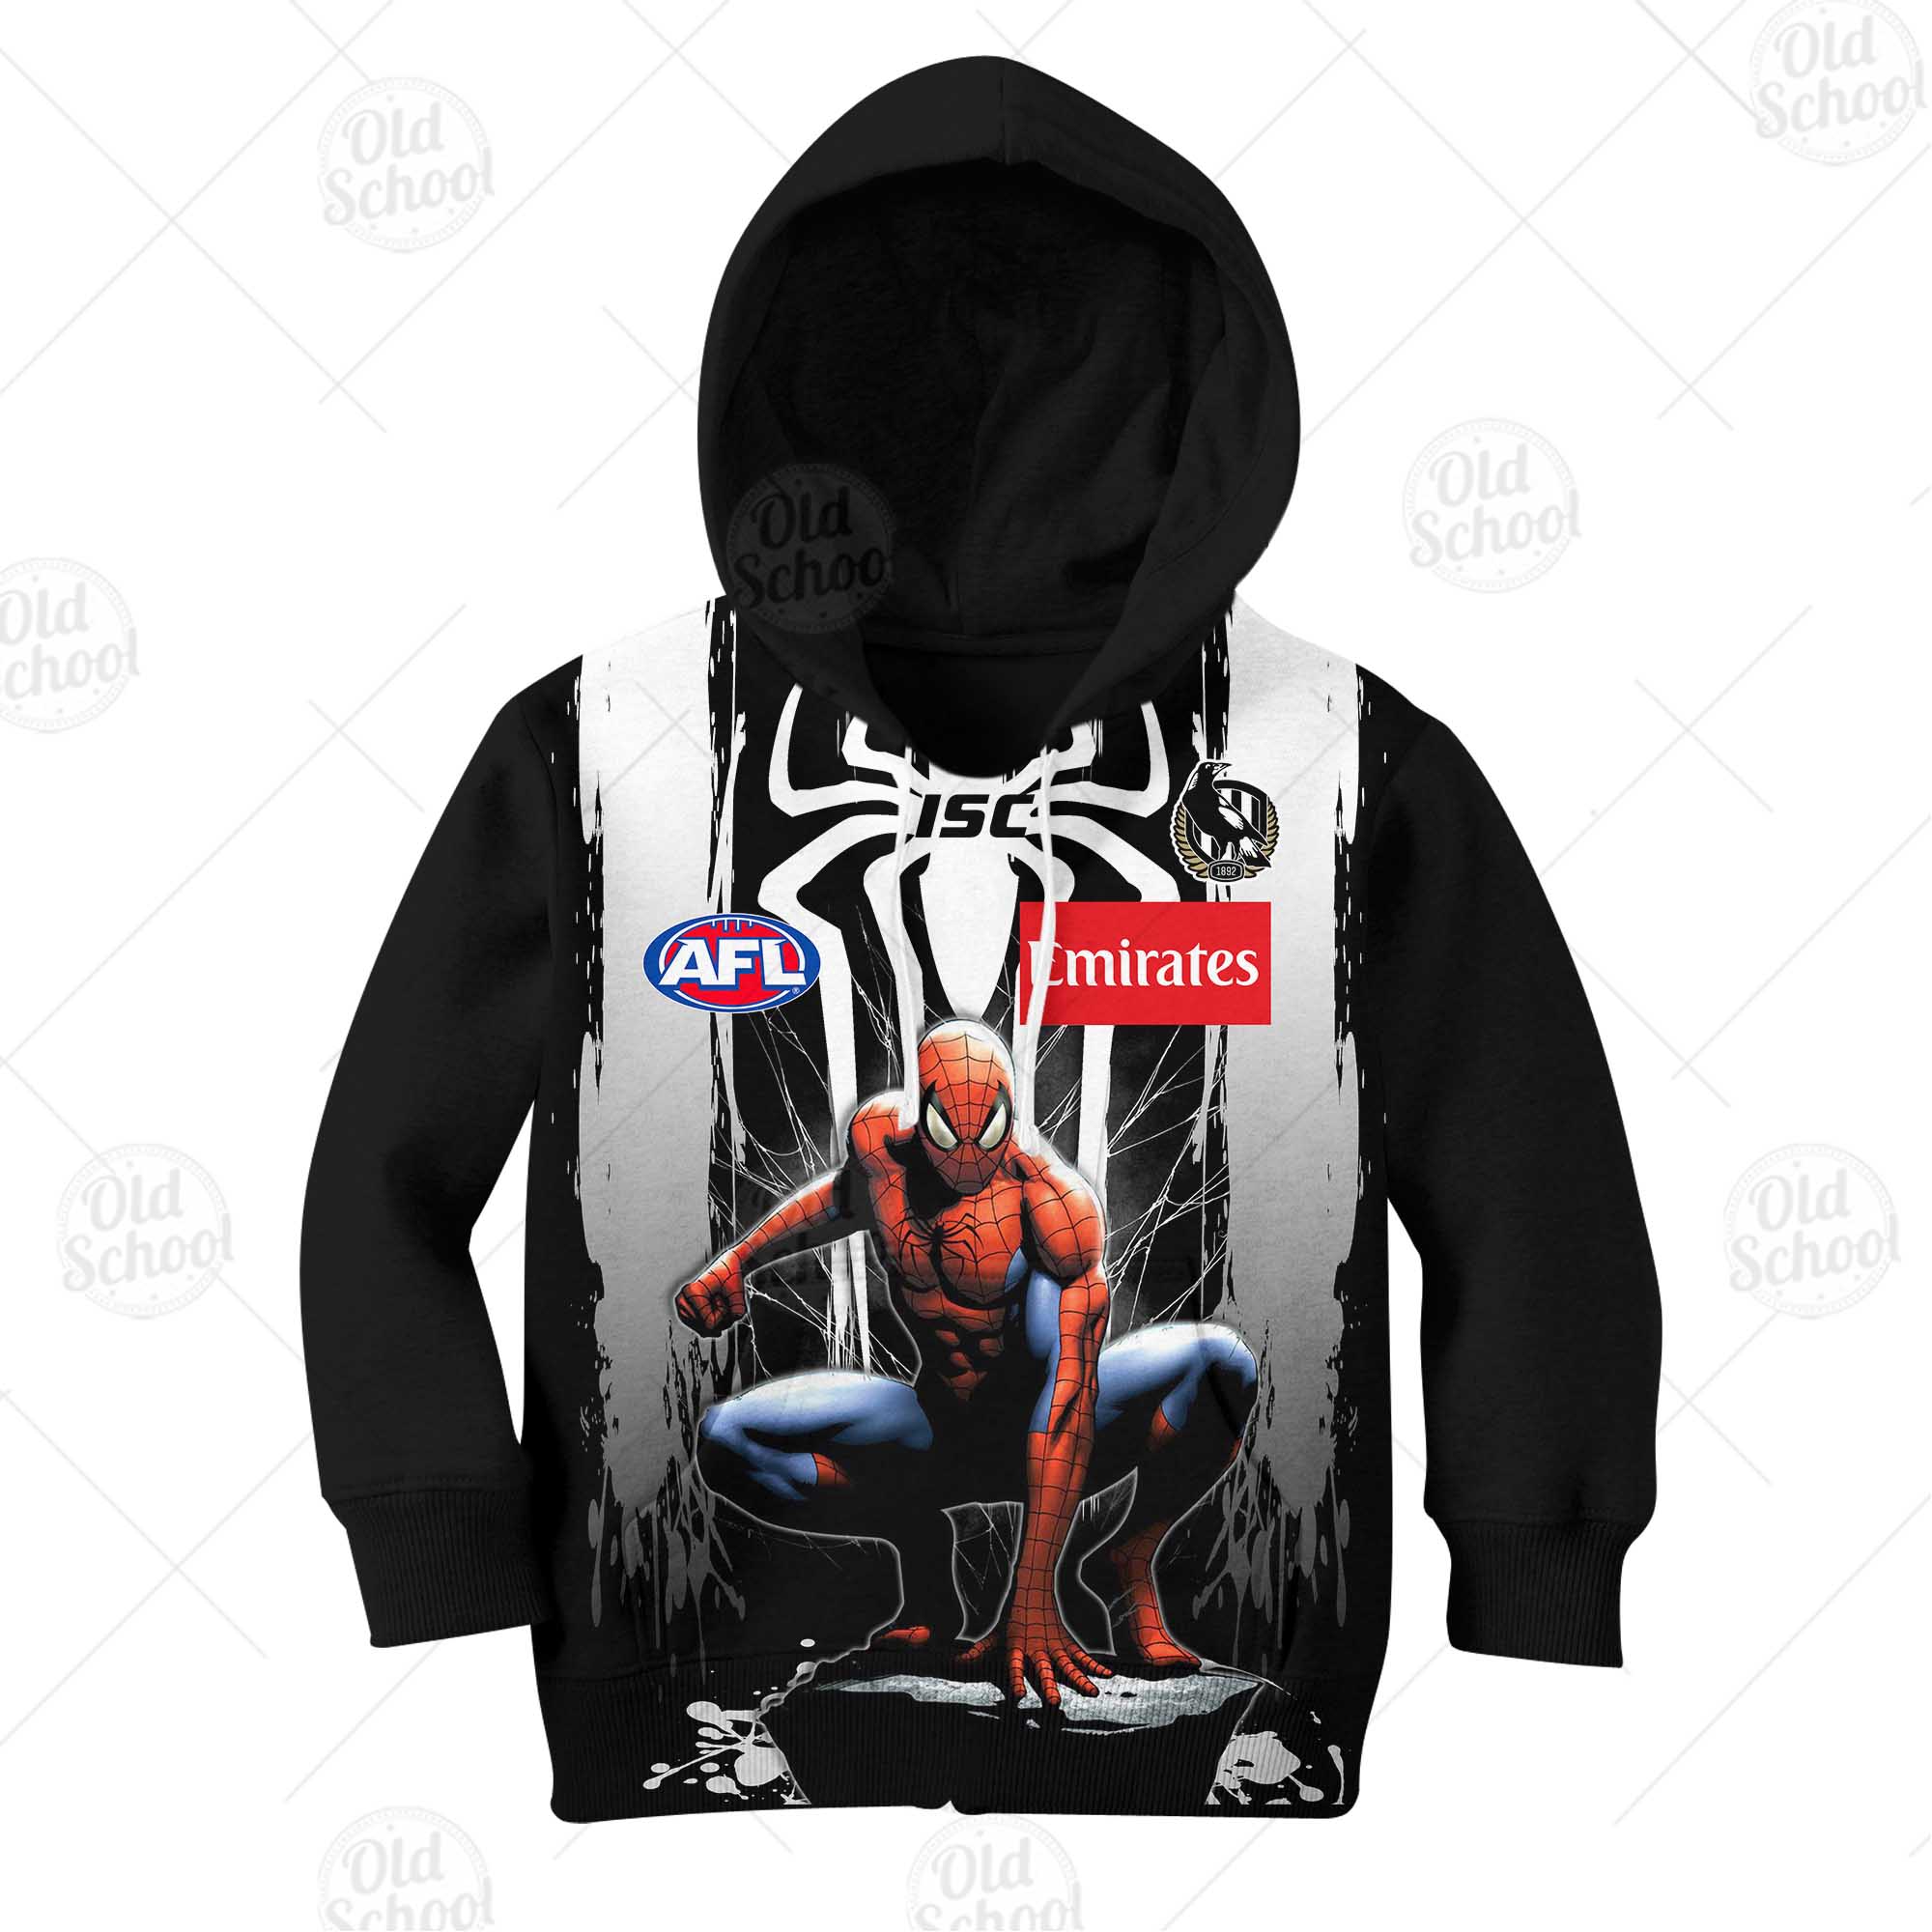 Personalise AFL Collingwood Mapies x Spiderman 2020 Jersey for Kids